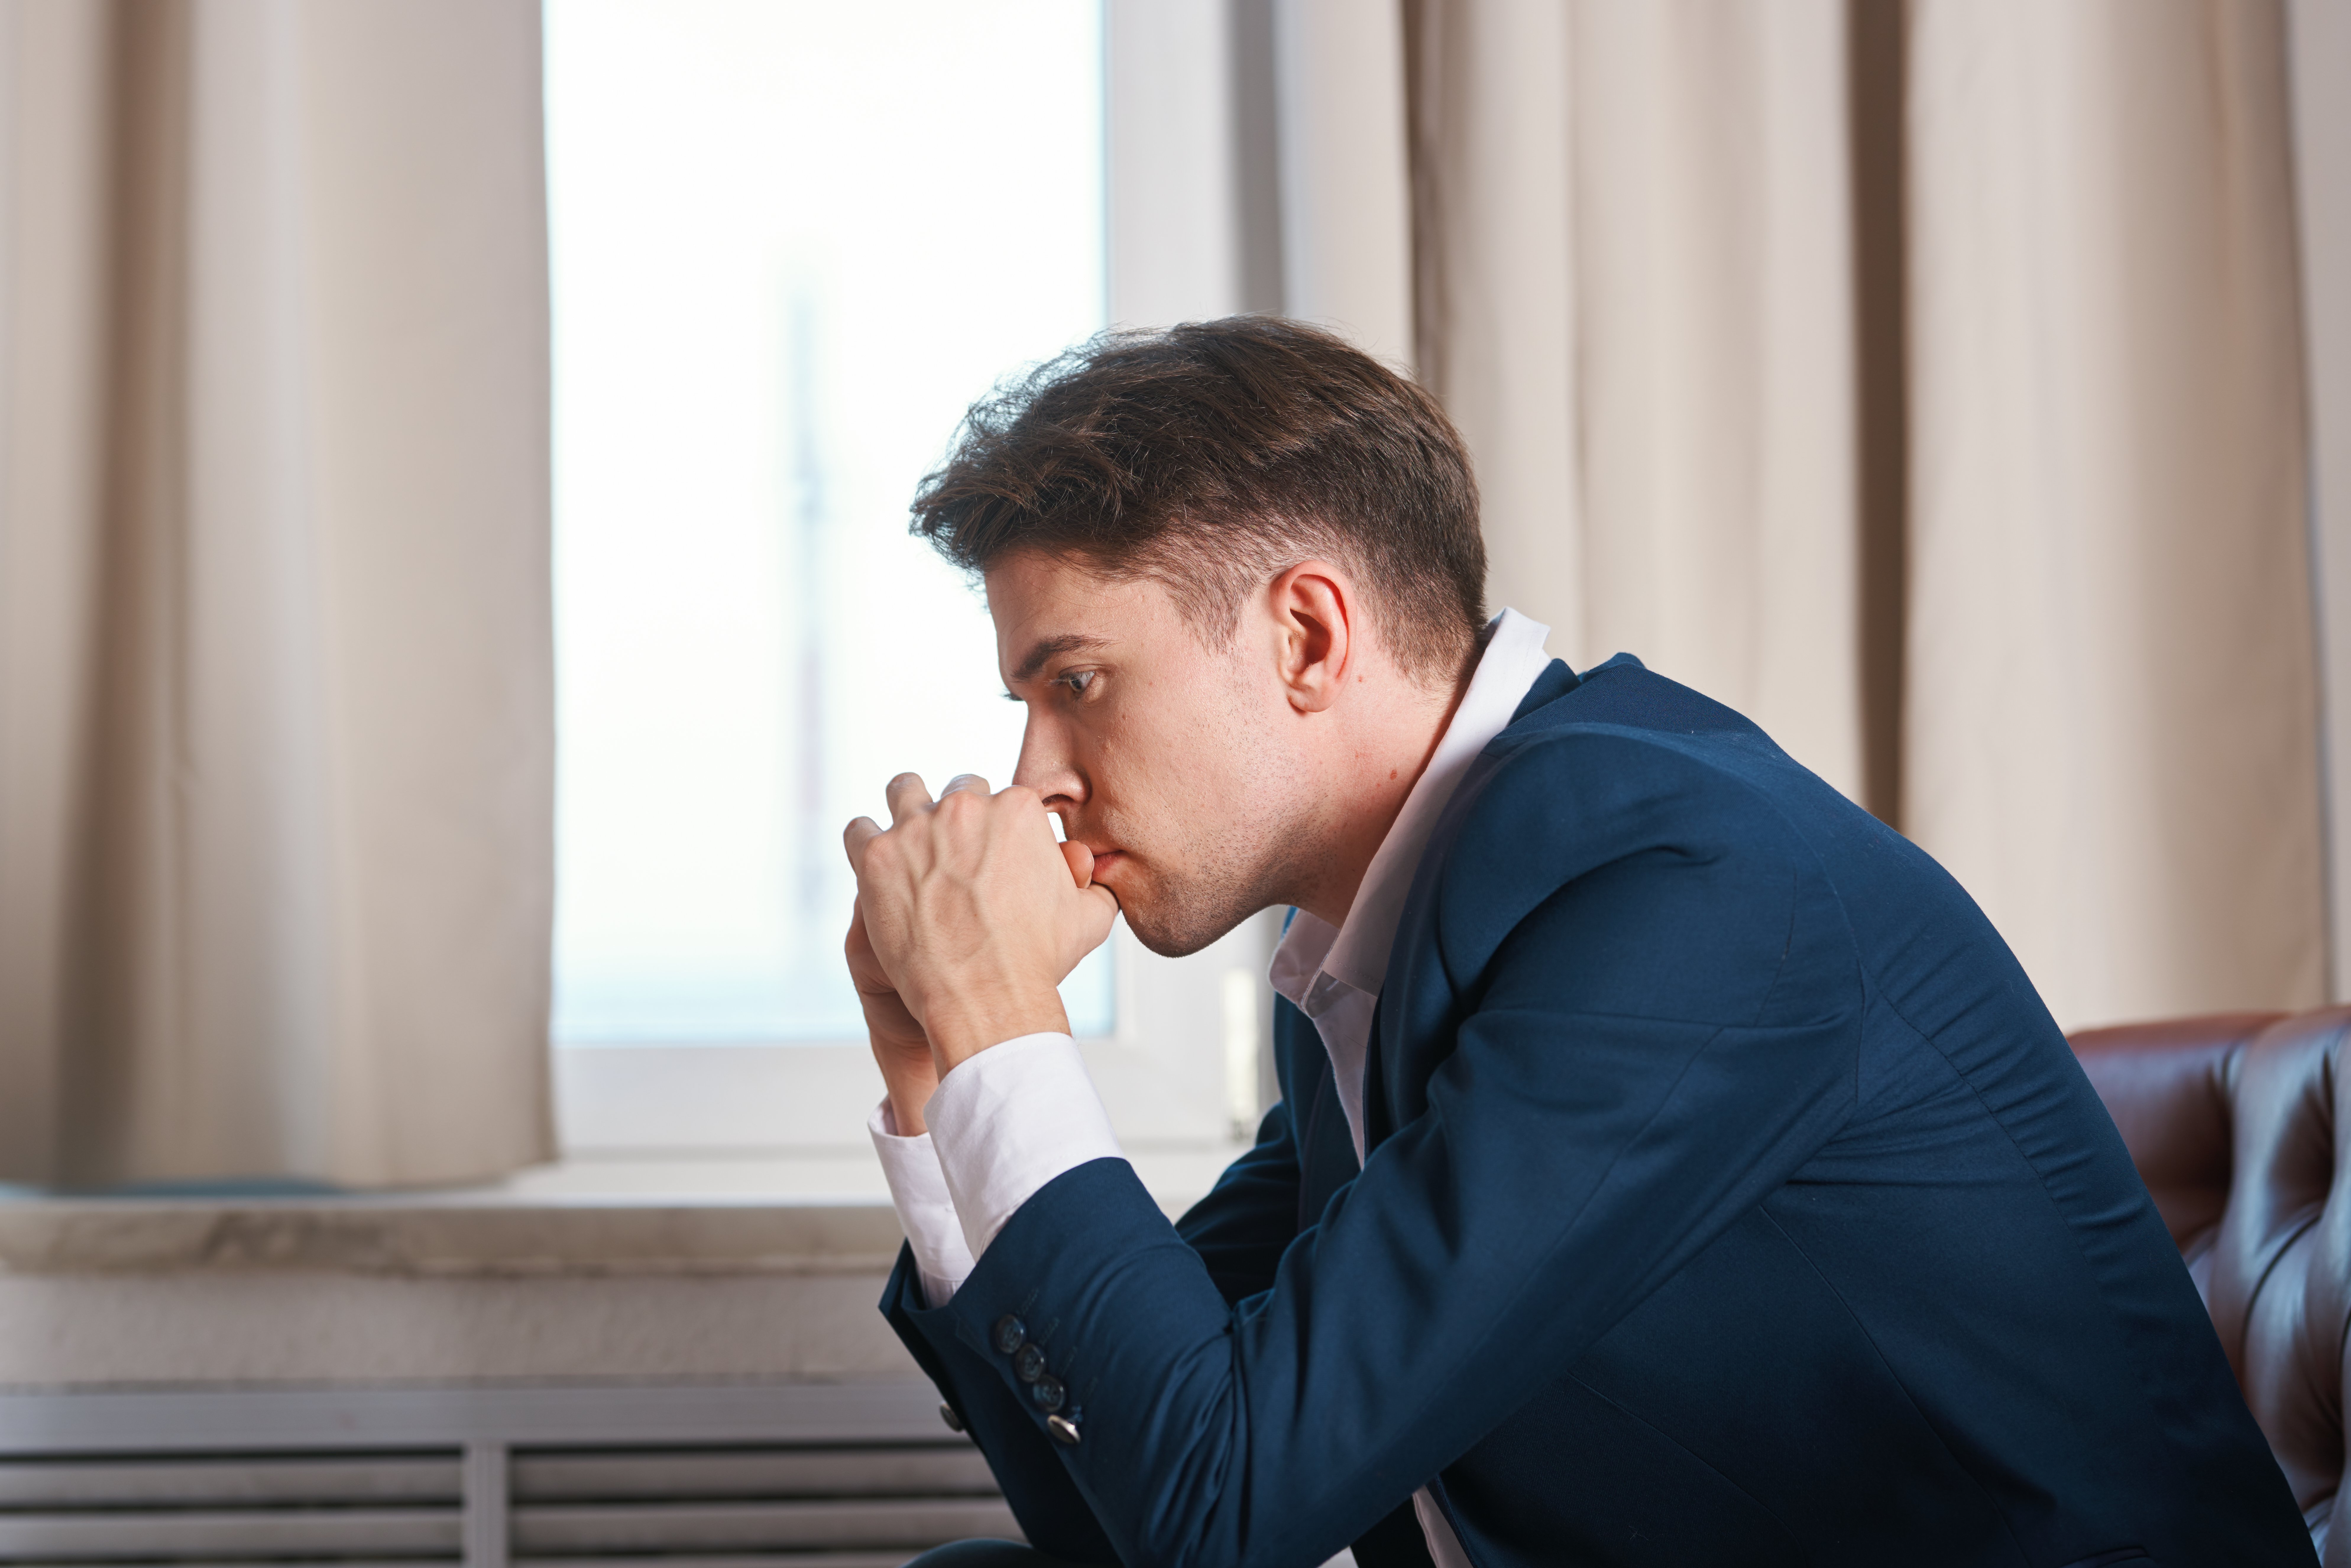 A business man holds his hands near the face with a pensive look of depression melancholy | Photo: Shutterstock.com